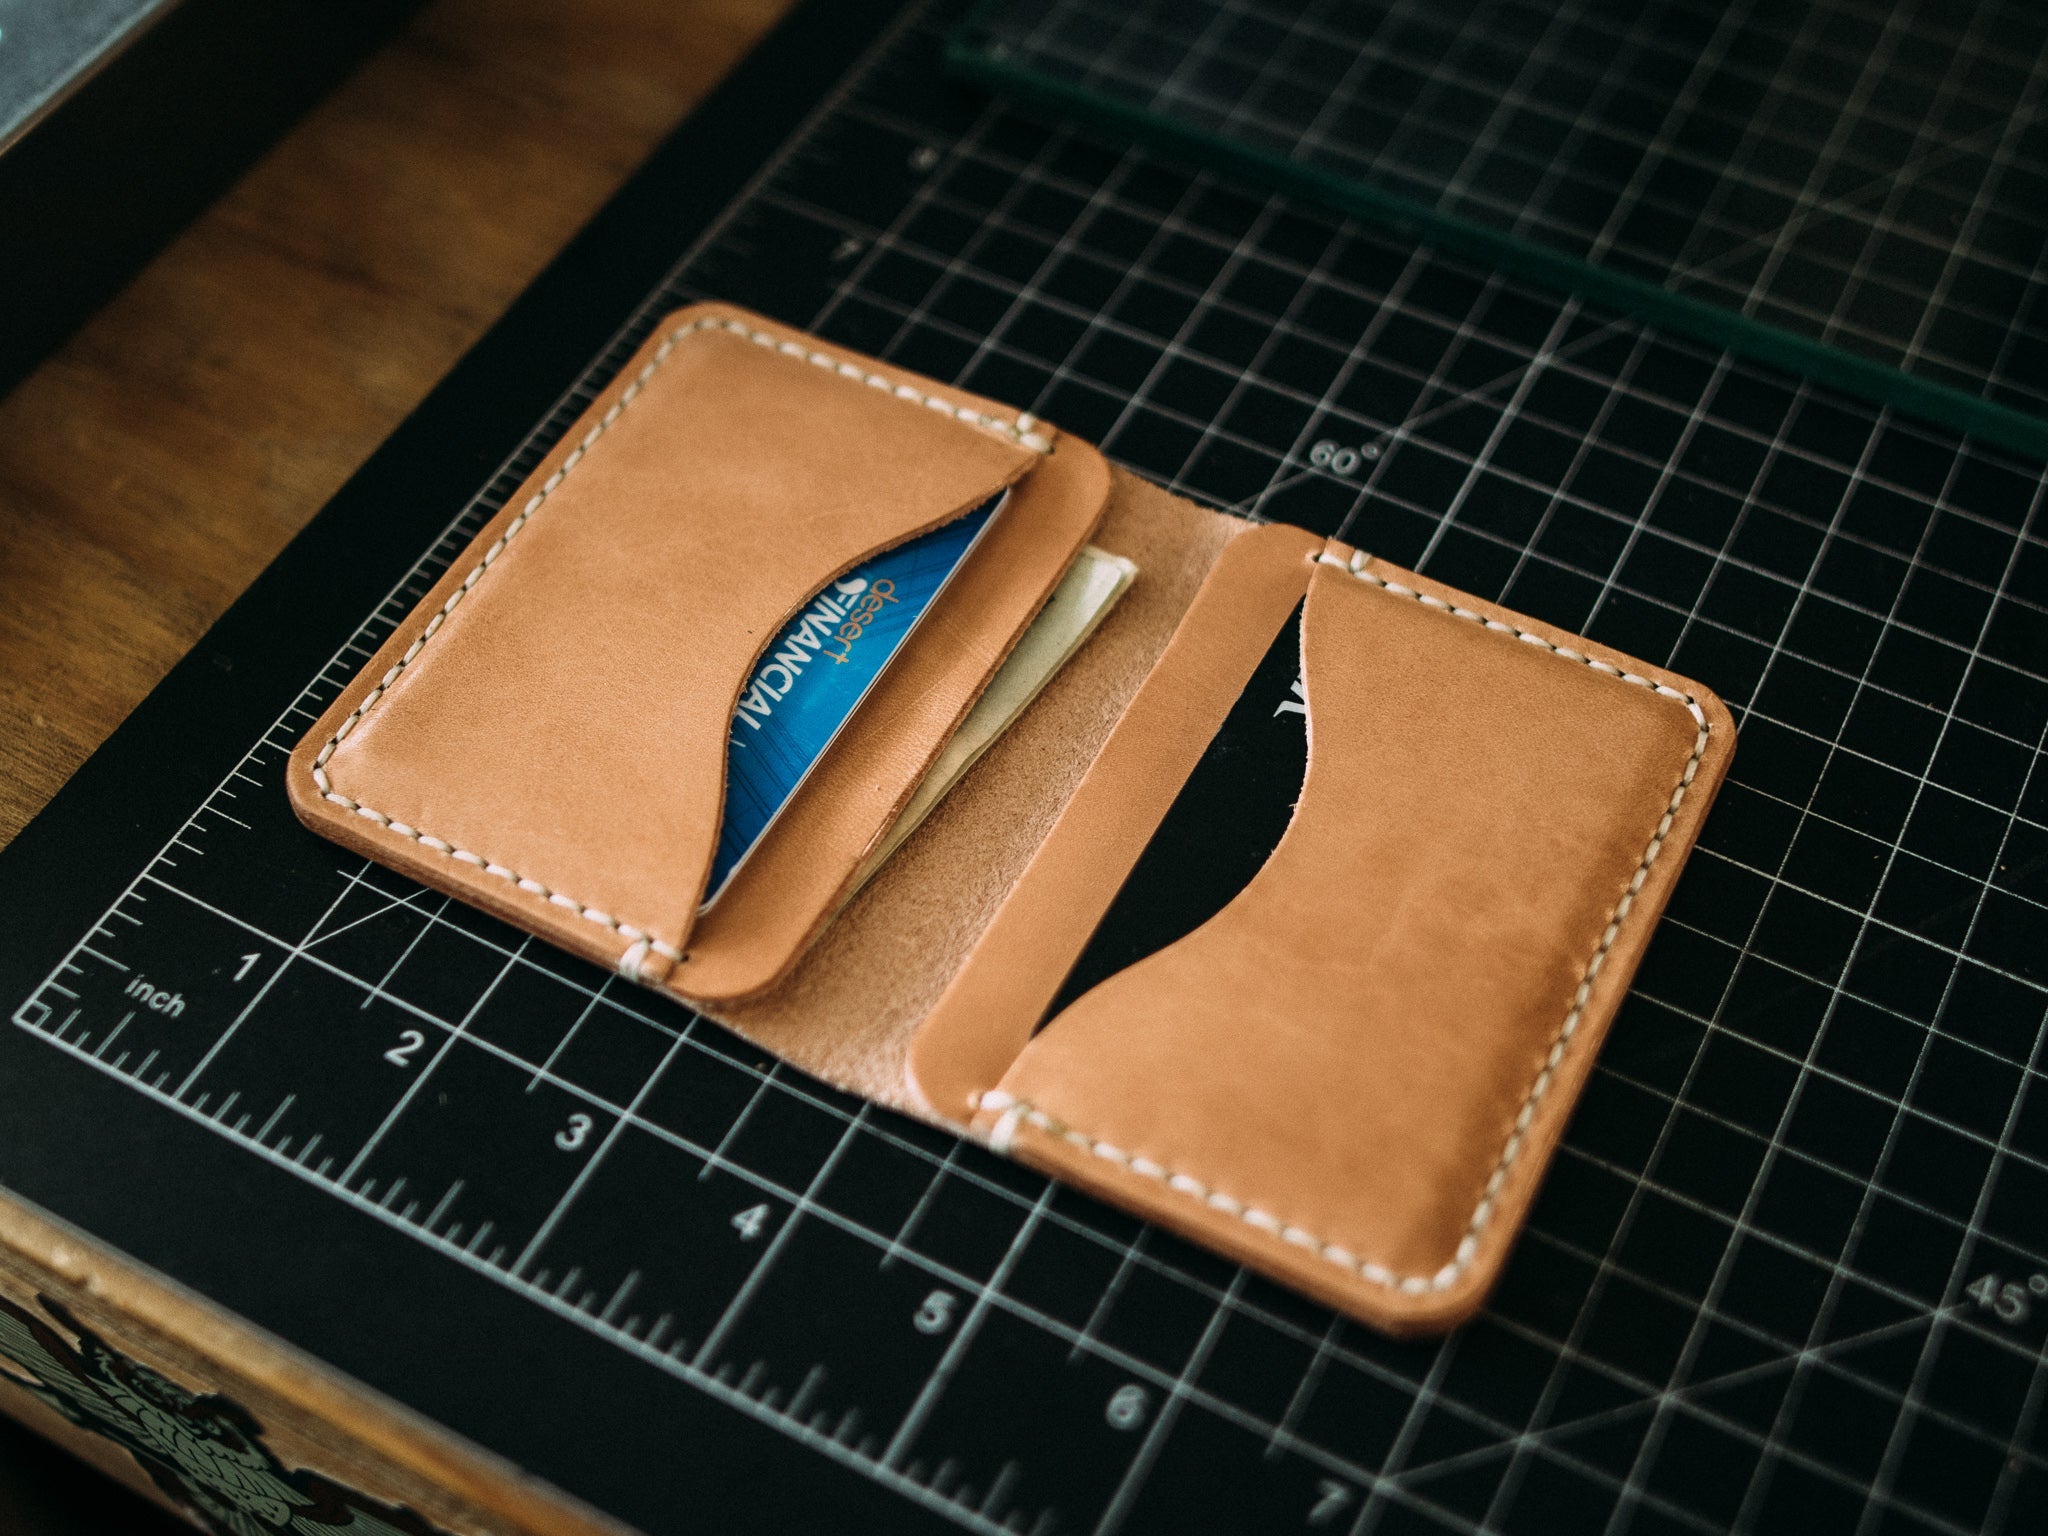 Tan with Black Vegan Leather Handcrafted Wallet and Card Holder Set